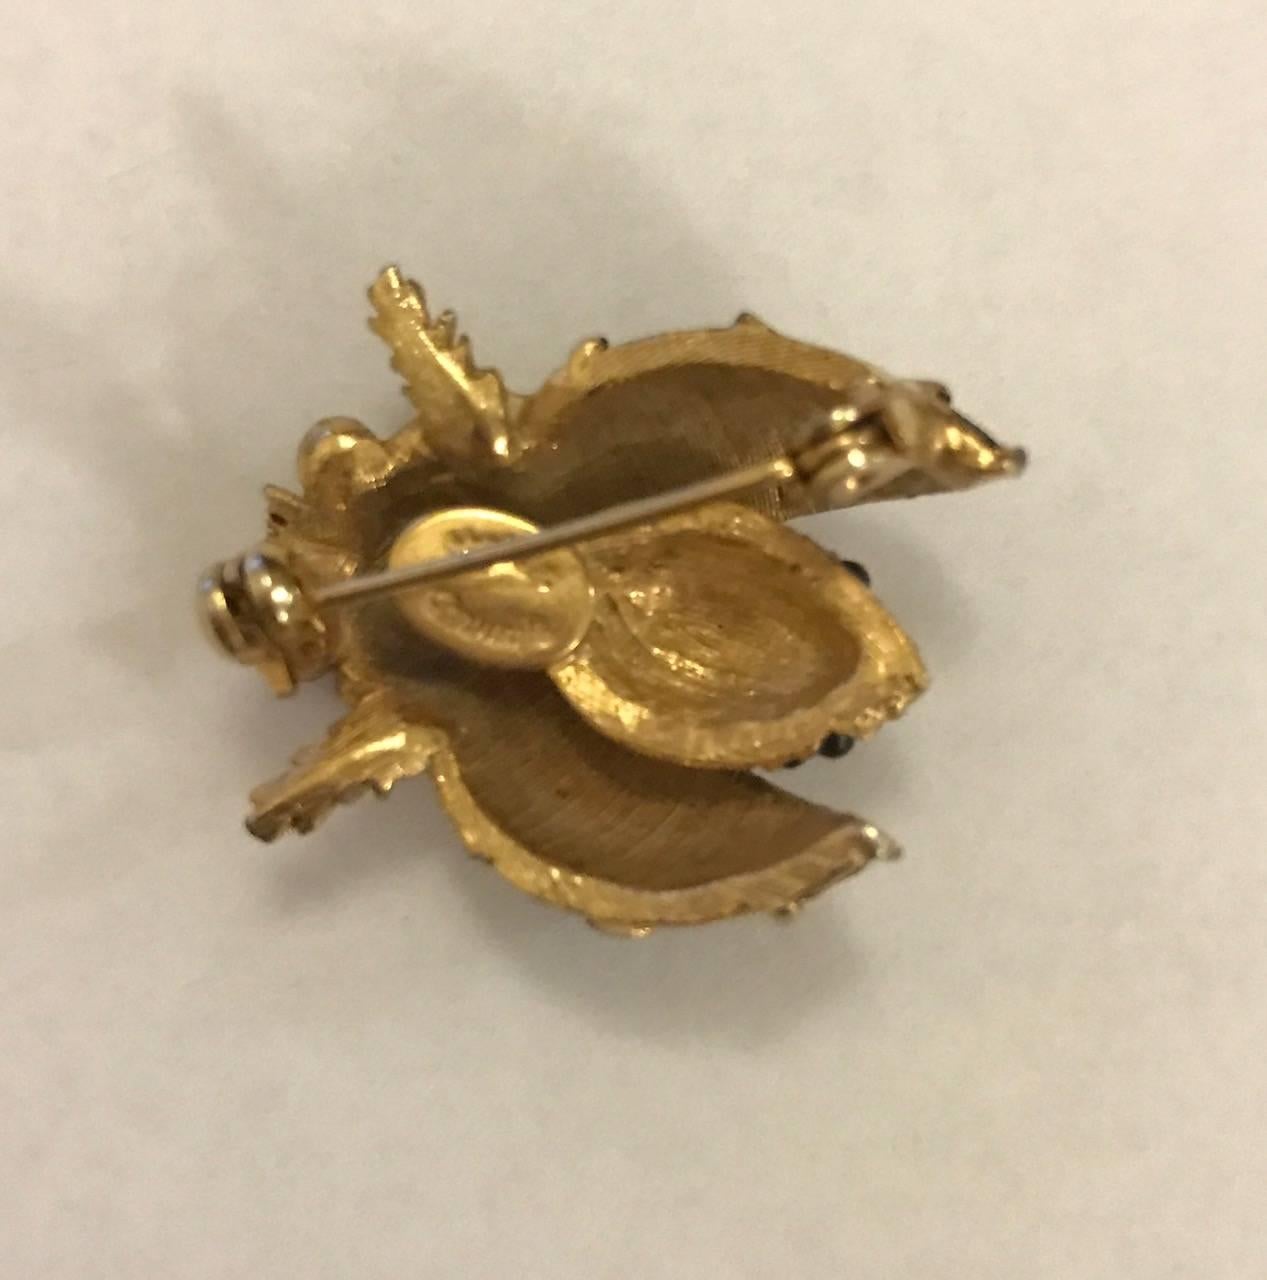 Hattie Carnegie signed vintage (1960's?) gold tone insect pin with enamel and glass detailing. Beautifully made with intricate detailing. Wear alone or embrace one of this season's biggest trends by clustering with others on your coat lapel.